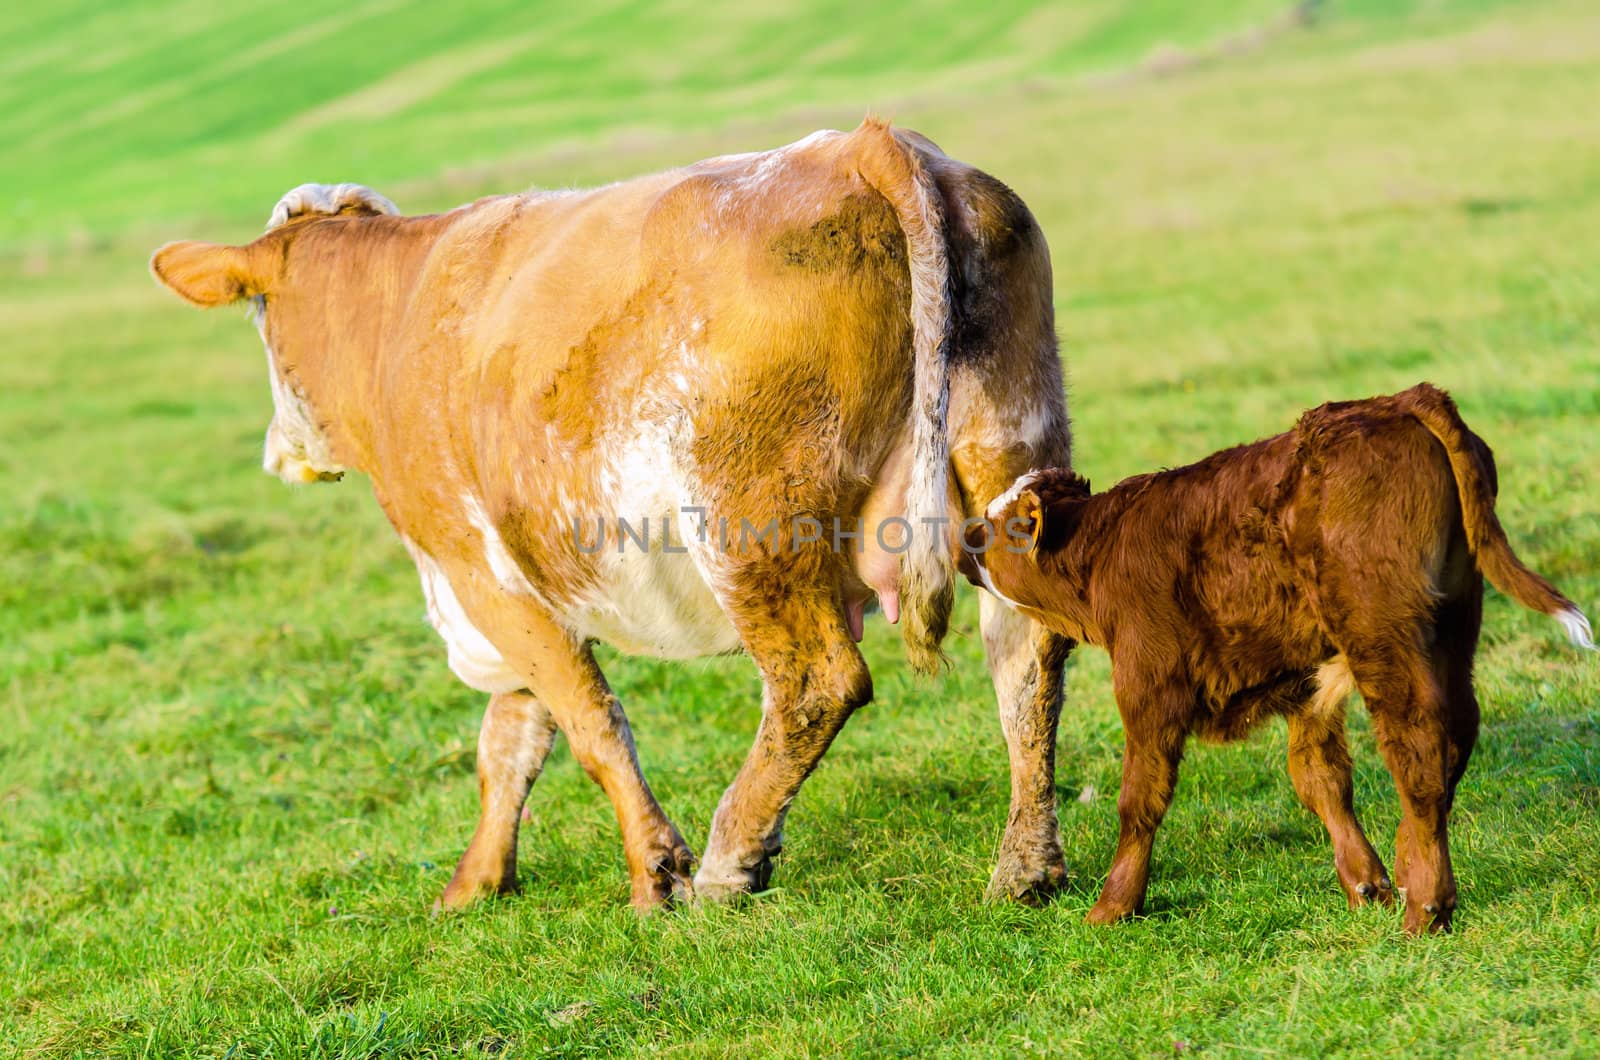 Cow and calf by gufoto